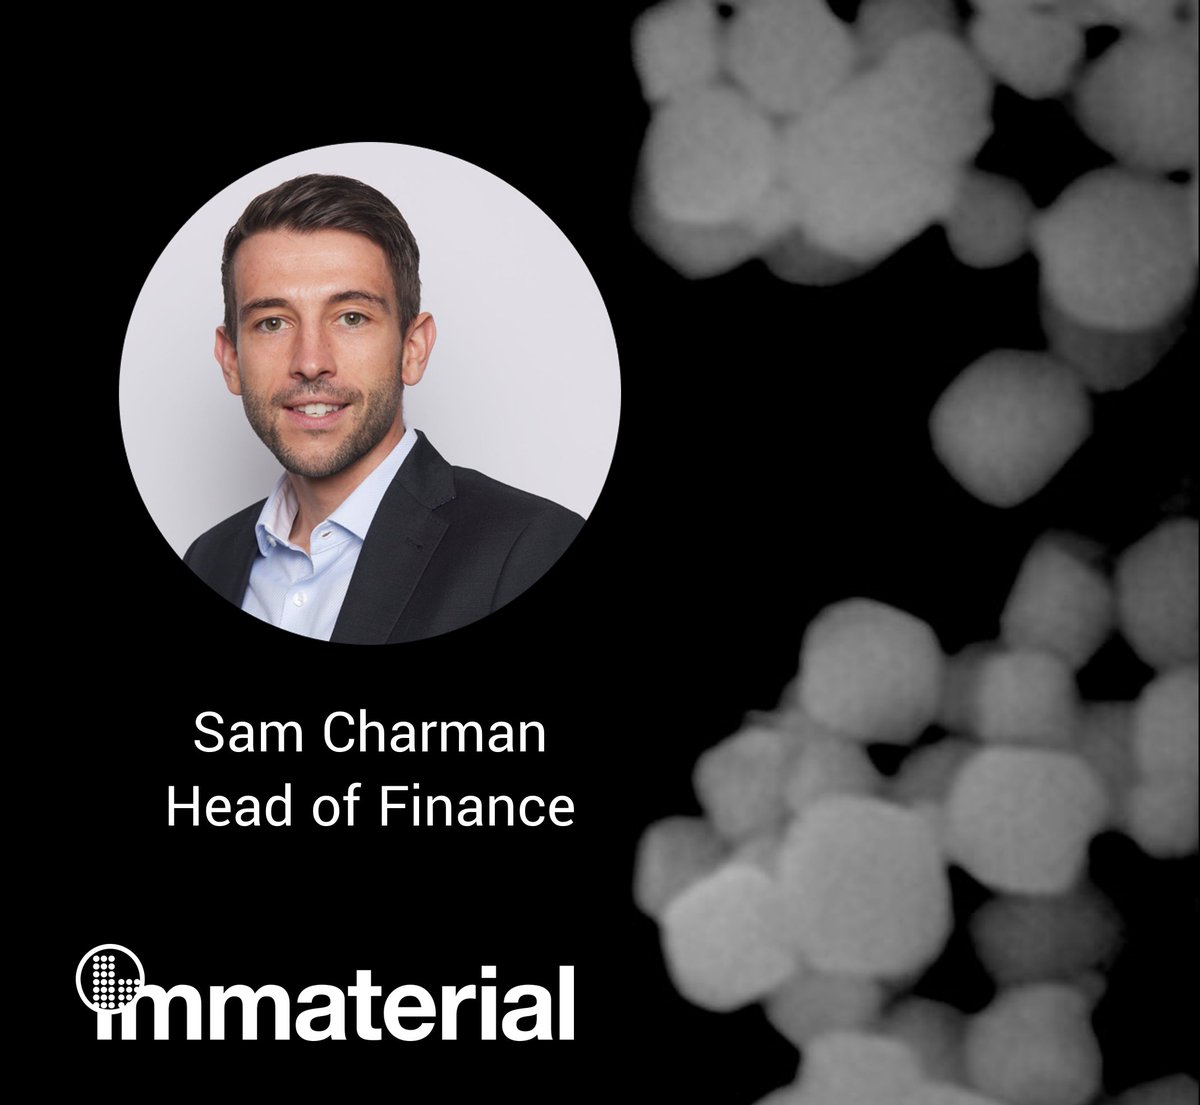 🎉Excited to introduce Sam, an experienced Chartered Accountant, as our new Head of Finane! Their expertise in #audit,  #corporatefinance, and #financialcontrol will be invaluable. Welcome  aboard, Sam!